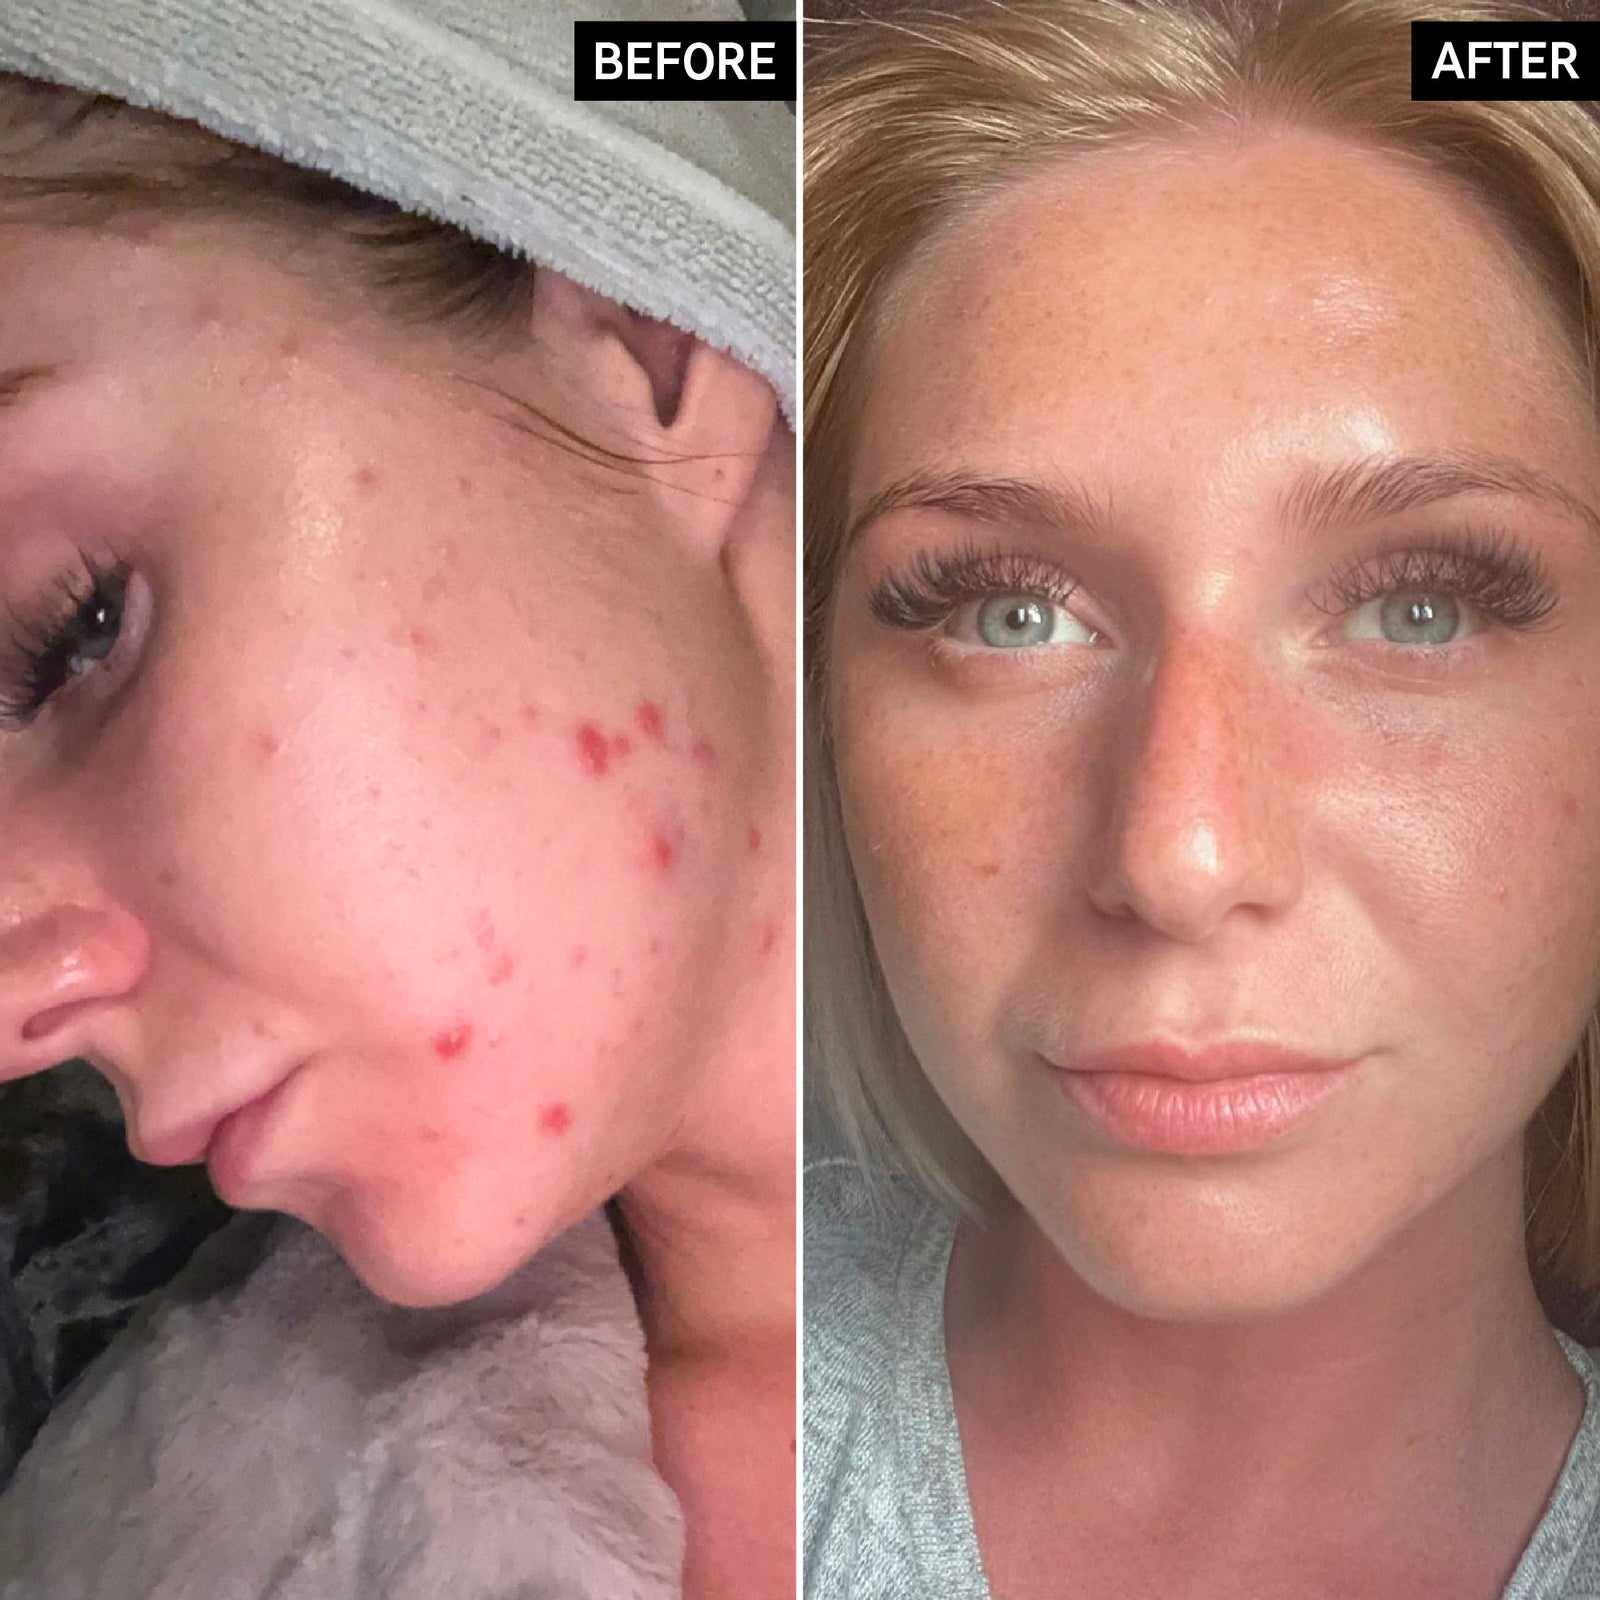 Before and after of Adelle from using the products in the Clearer Skin Cleanse Duo displaying positive results after a 3 month period